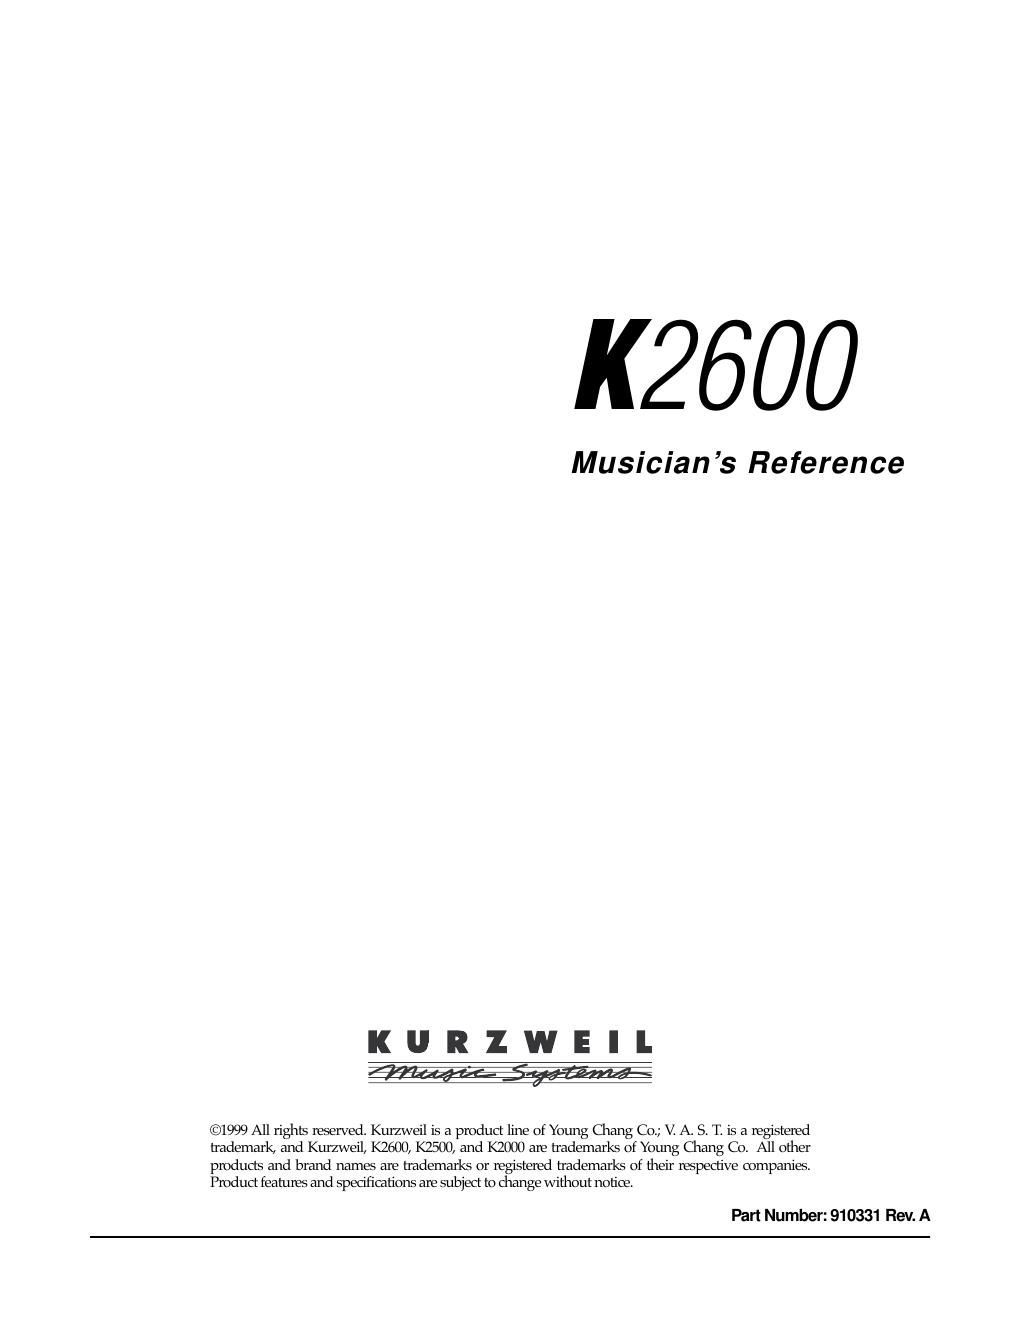 kurzweil k2600 reference guide